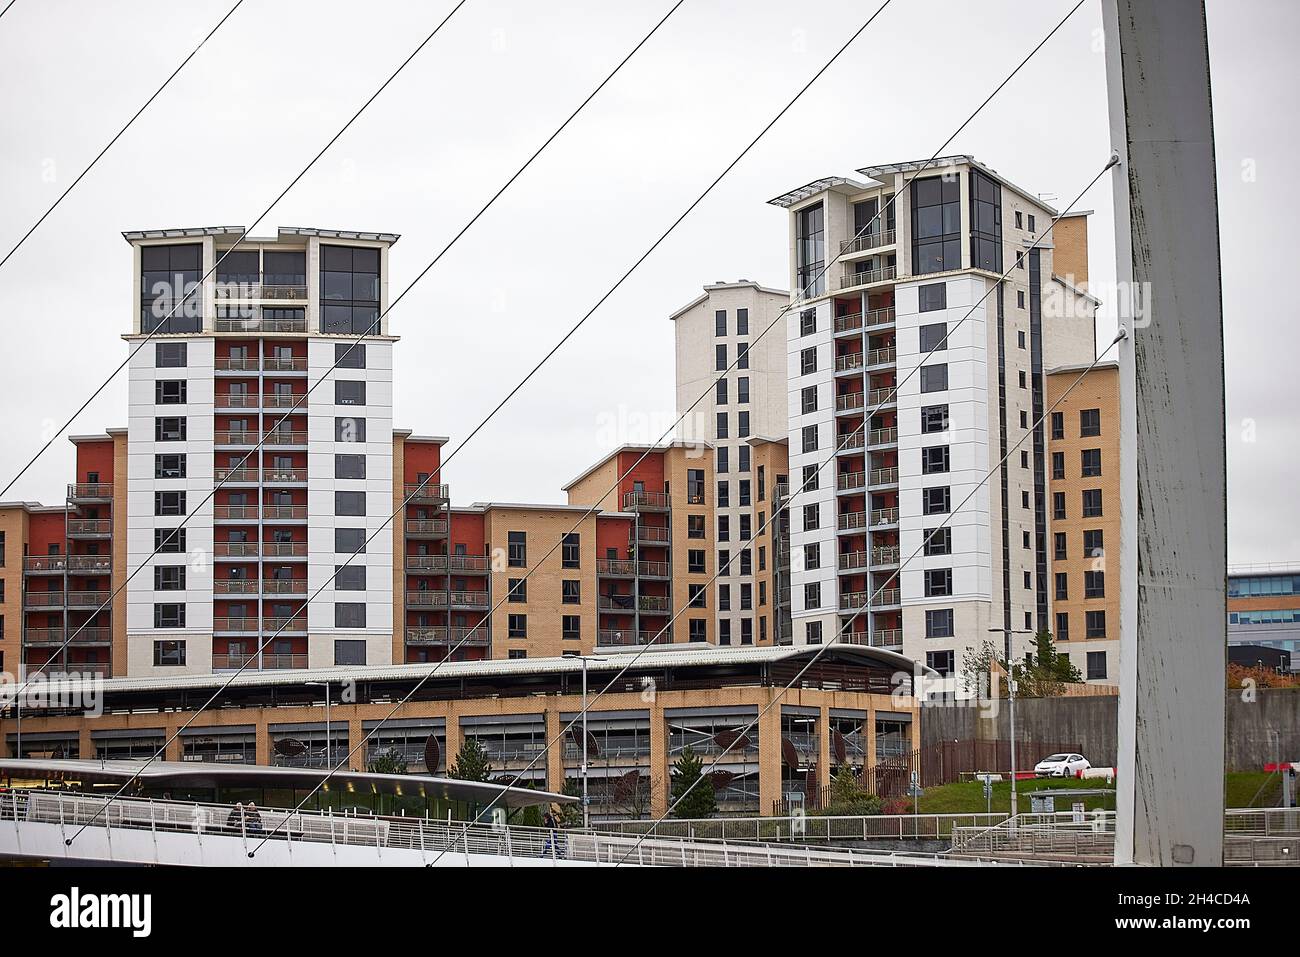 Newcastle upon Tyne Quayside area Baltic Quay apartments in gateshead overlooking the River Tyne Stock Photo